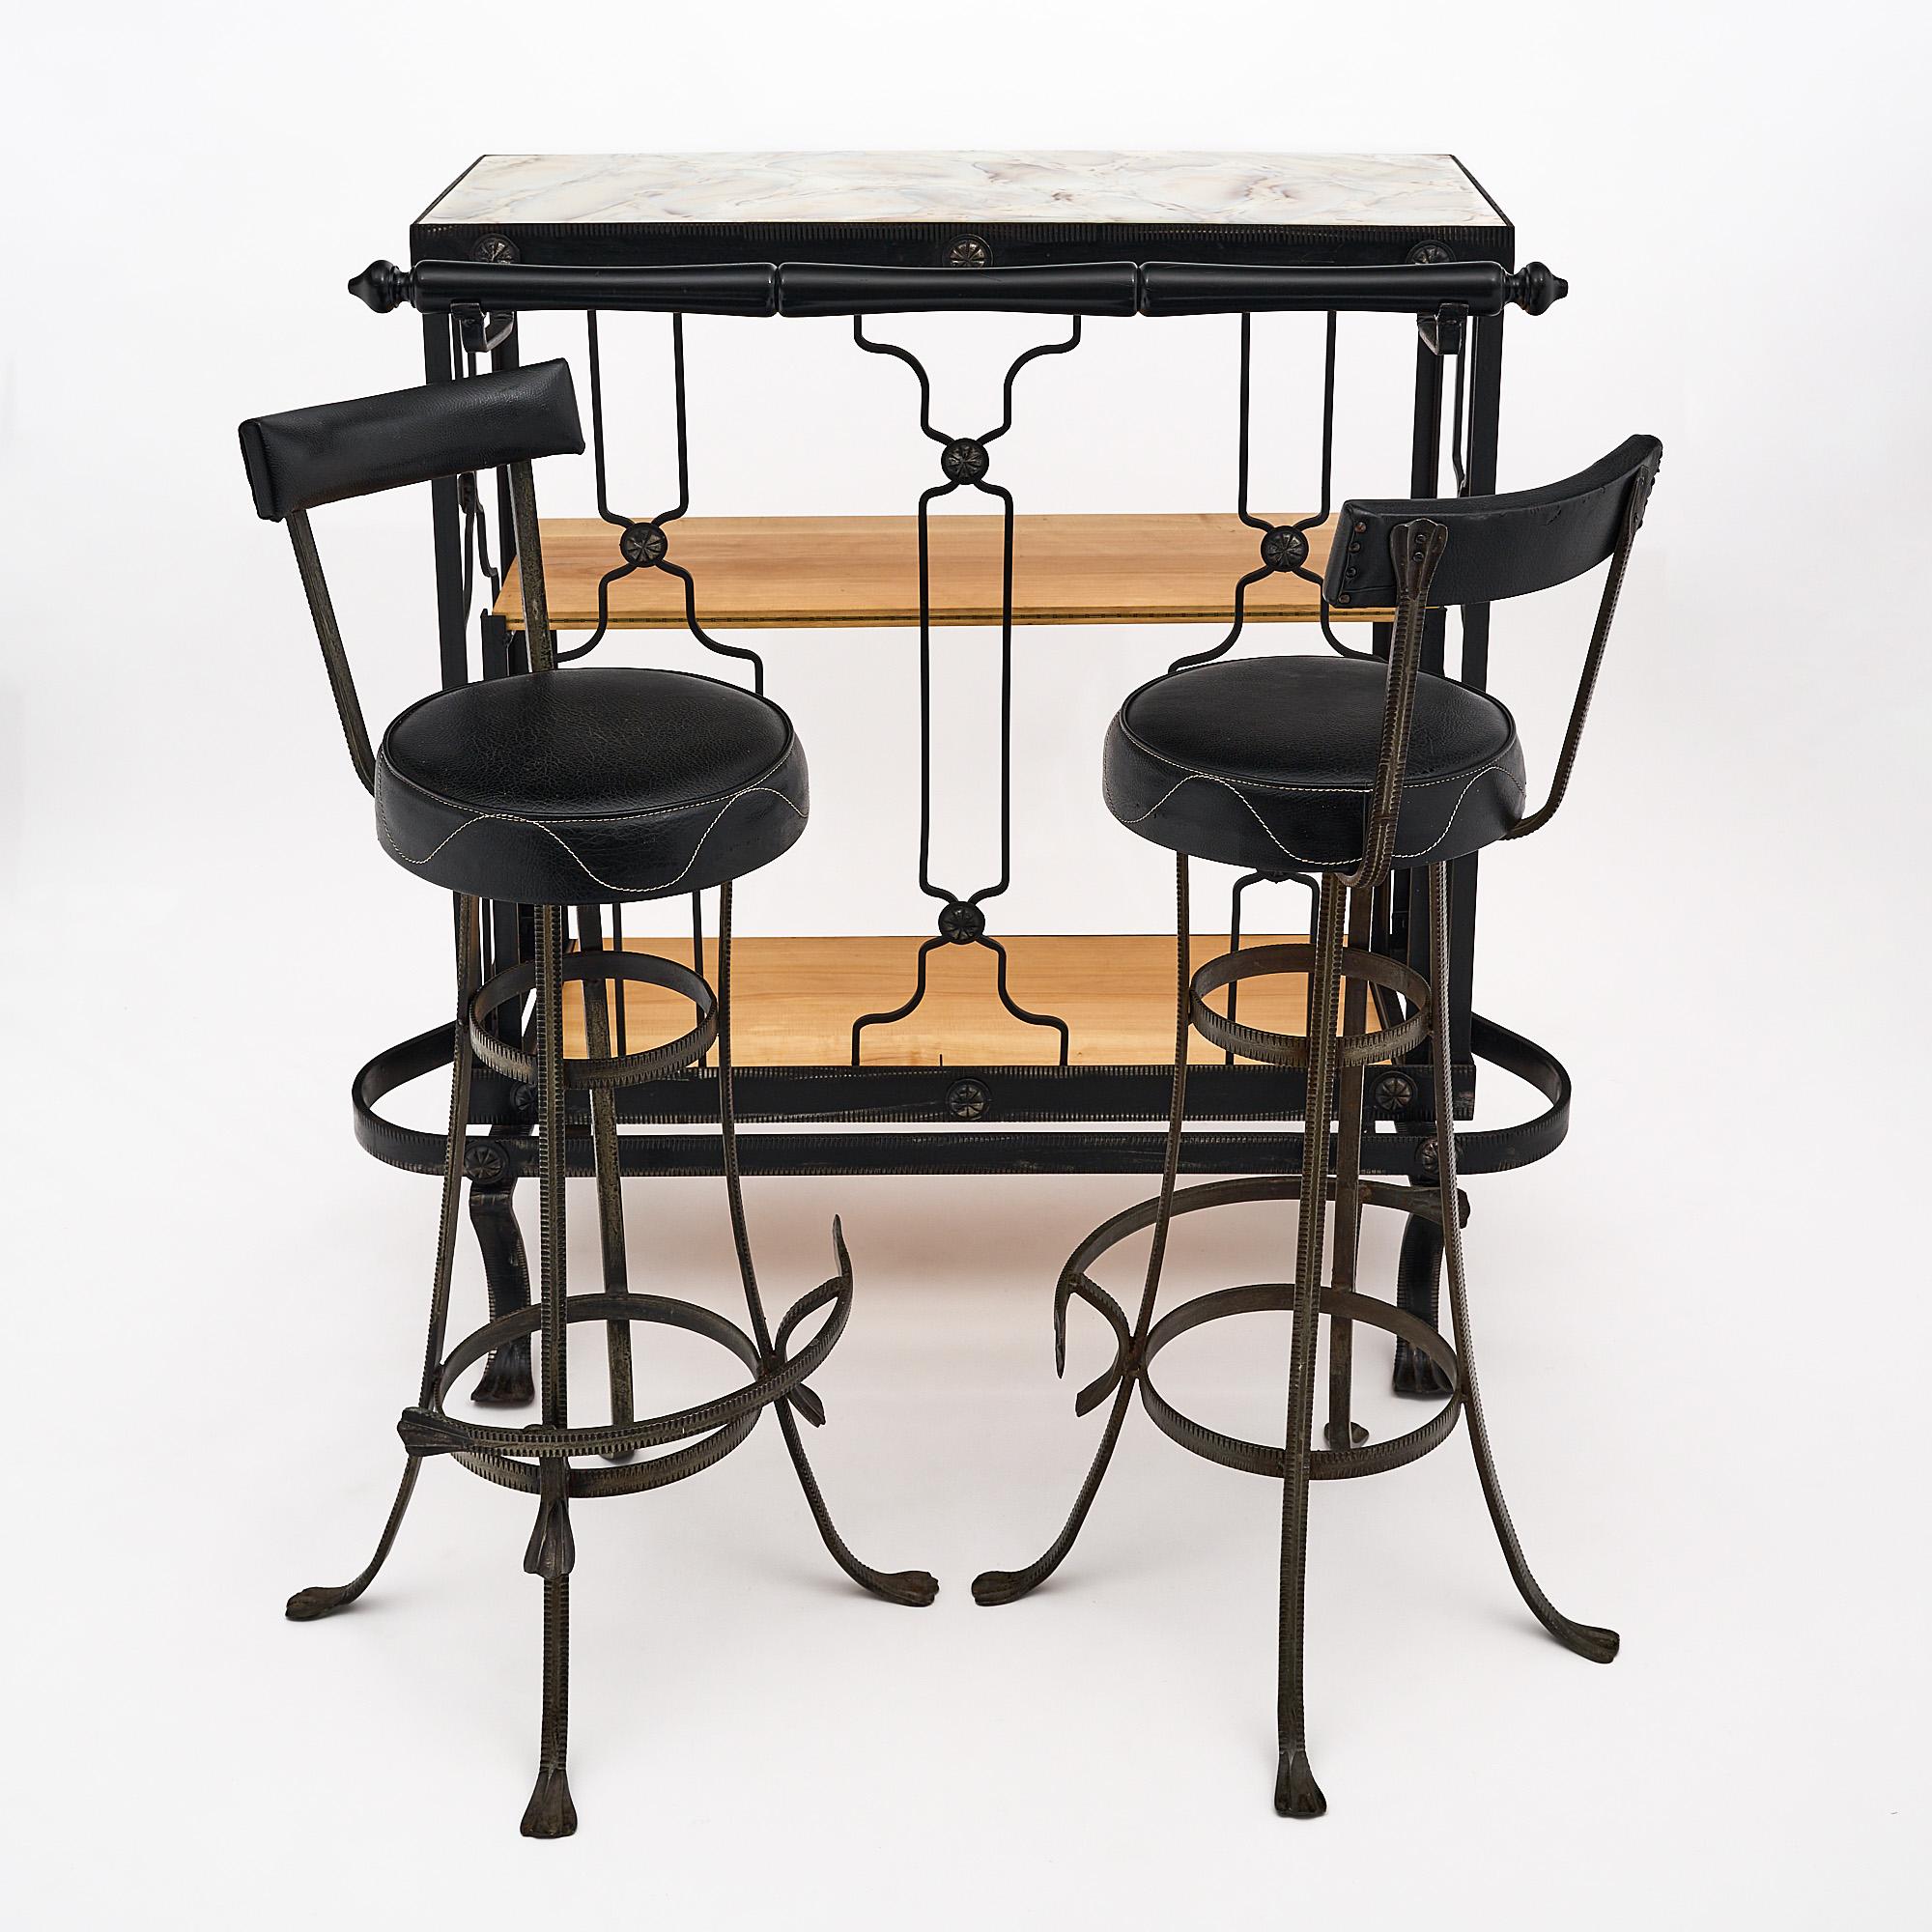 Bar and stools, French, from the Art Deco period. This set is made of hand-hammered forged iron with a custom glass top. The original vinyl upholstery is on the stools and there are two interior wood shelves. The dimensions listed are for the bar,